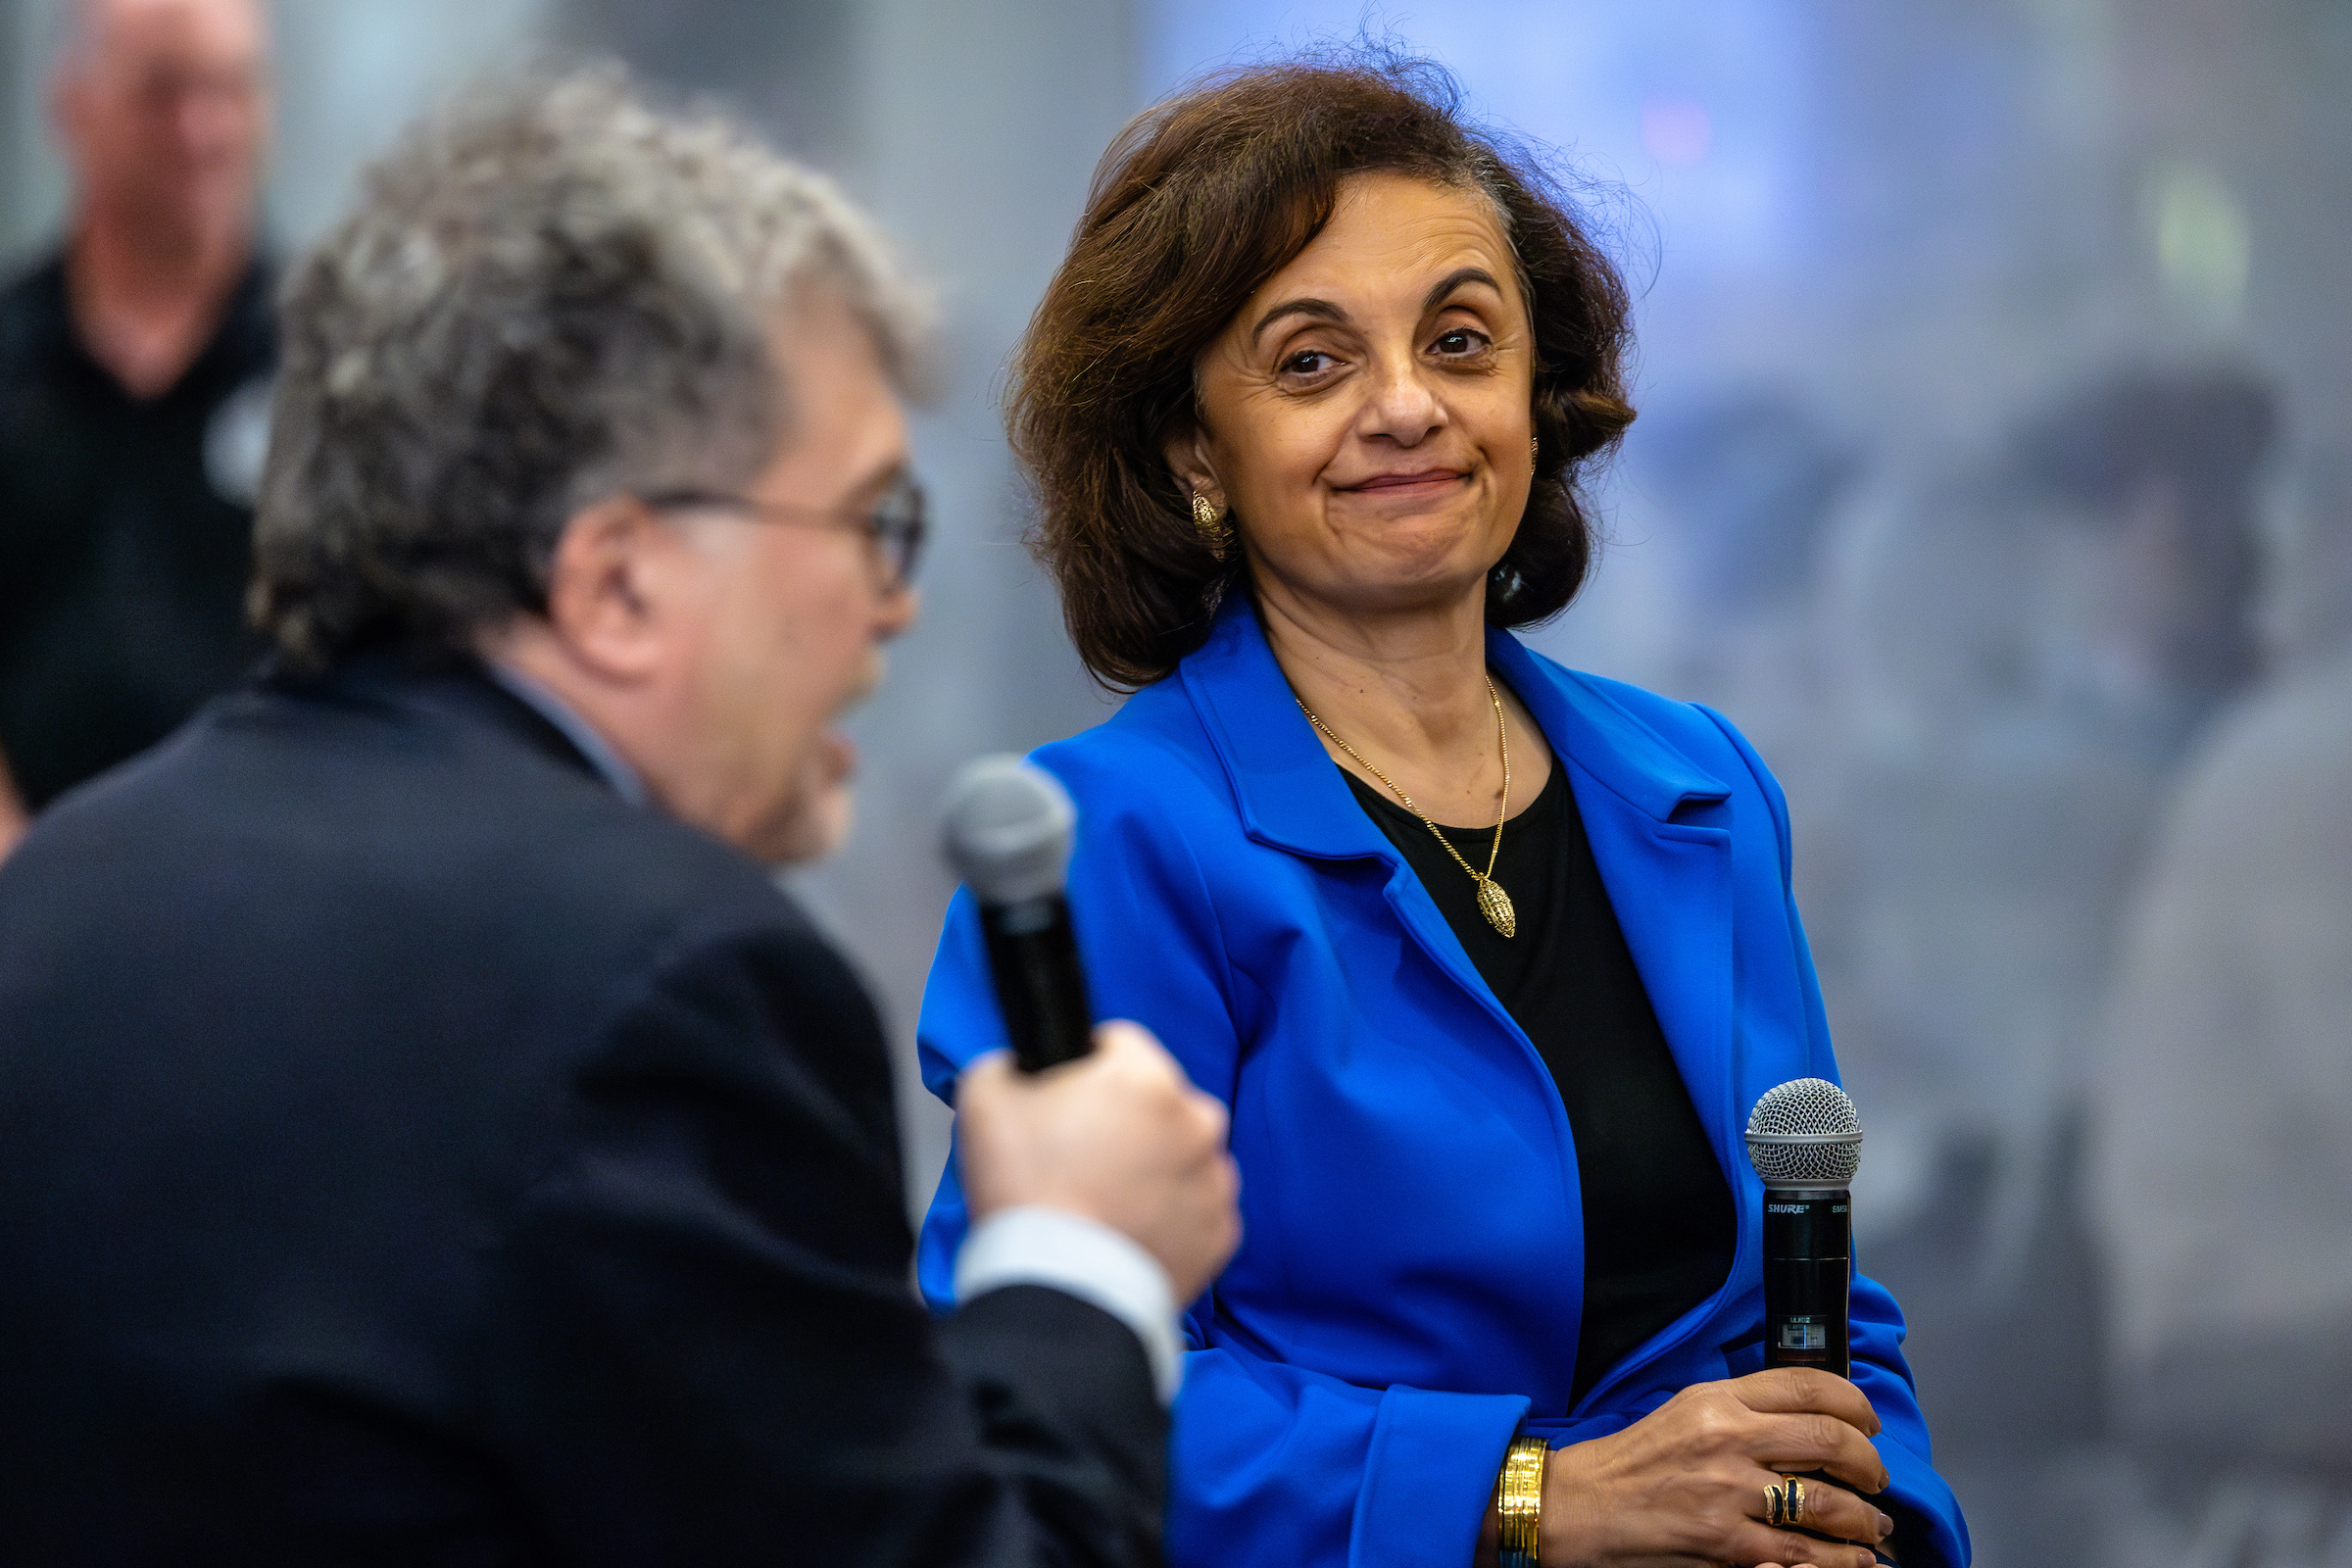 Woman with short brown hair and blue jacket holds microphone and listens to man holding microphone speak